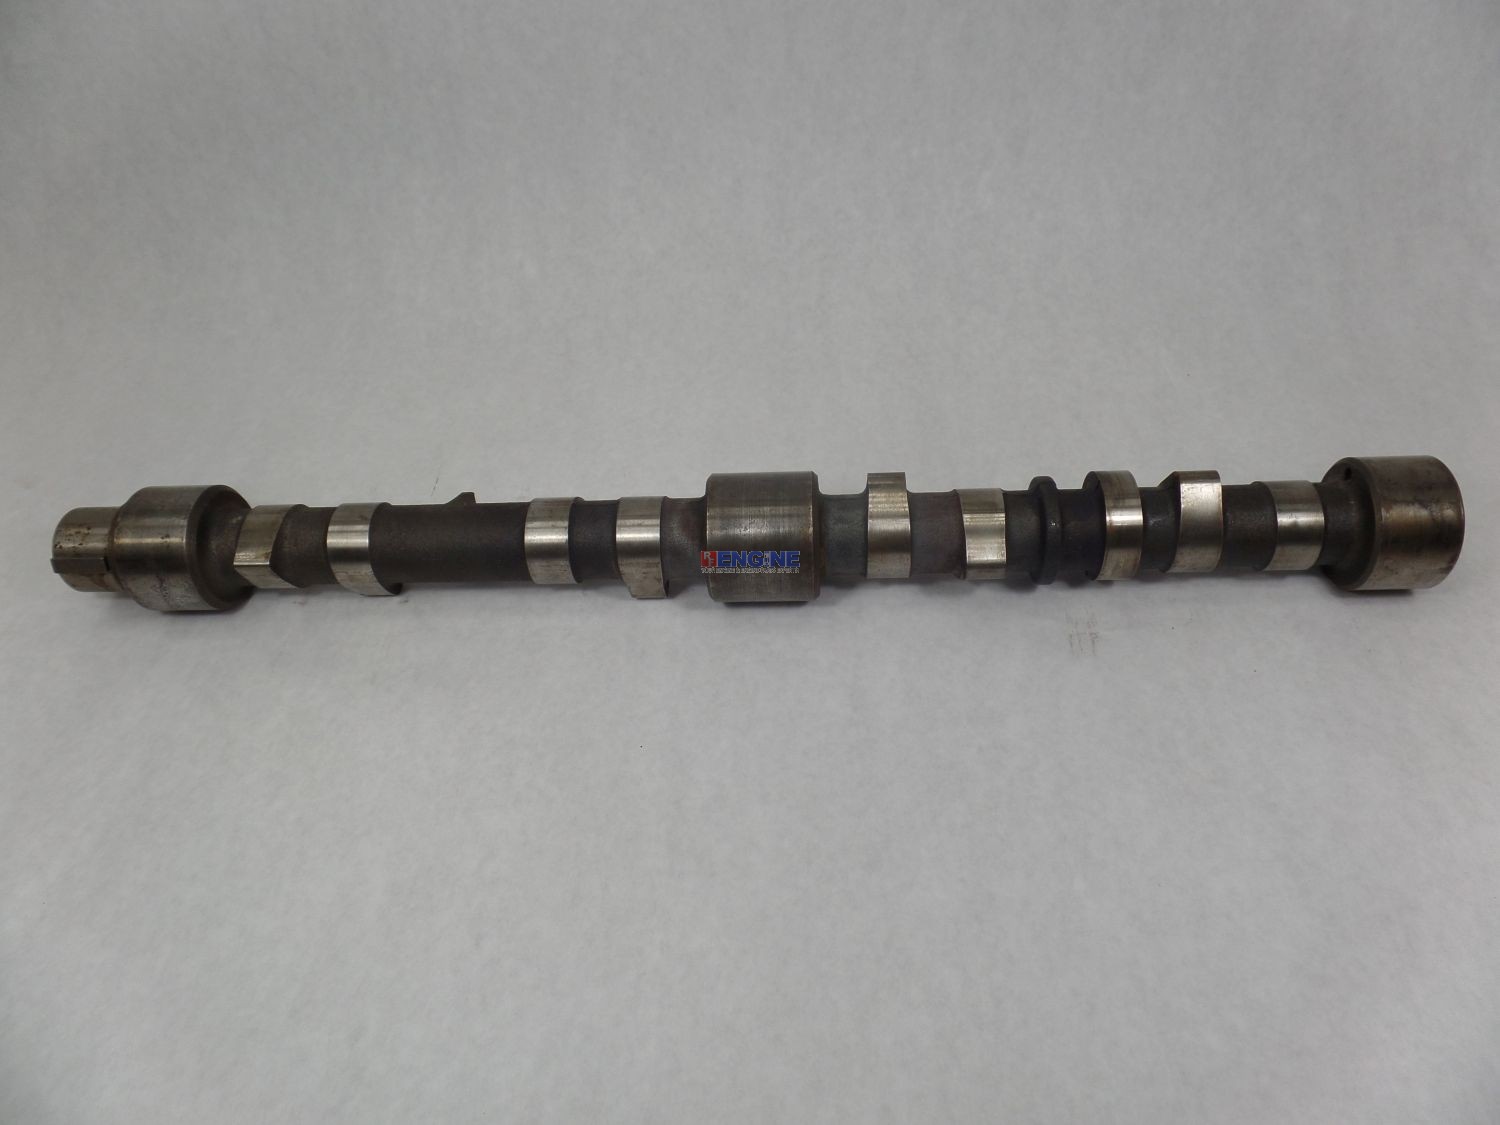 perkins-4-236-camshaft-remachined-31415320